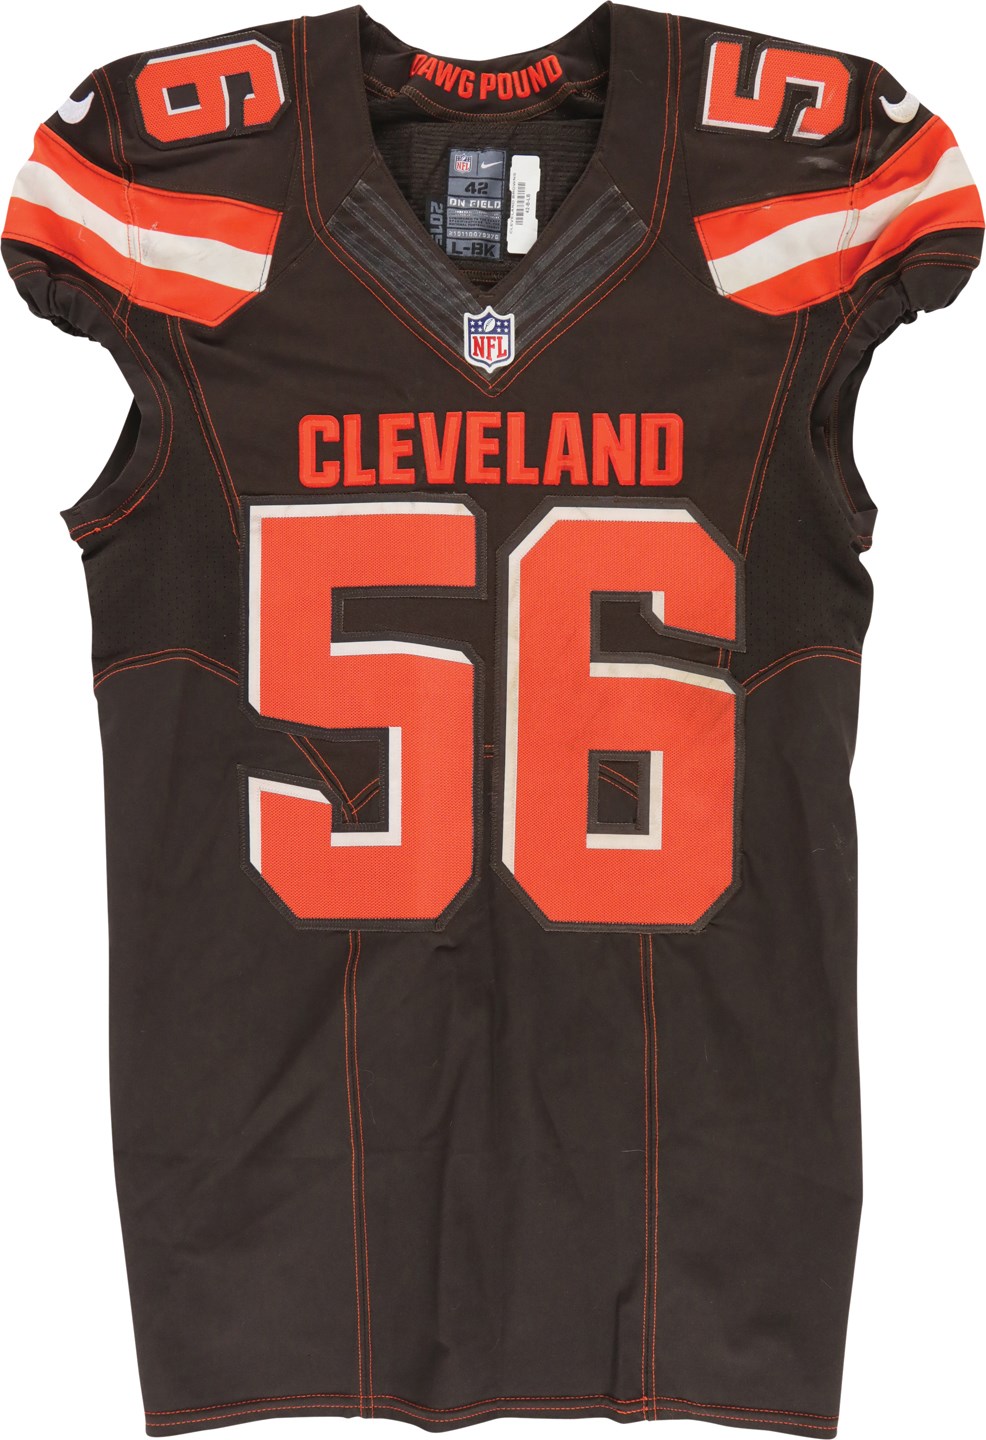 11/30/15 Karlos Dansby Unwashed Cleveland Browns Game Worn Jersey - 52 Yard Interception Touchdown! (Photo-Matched)